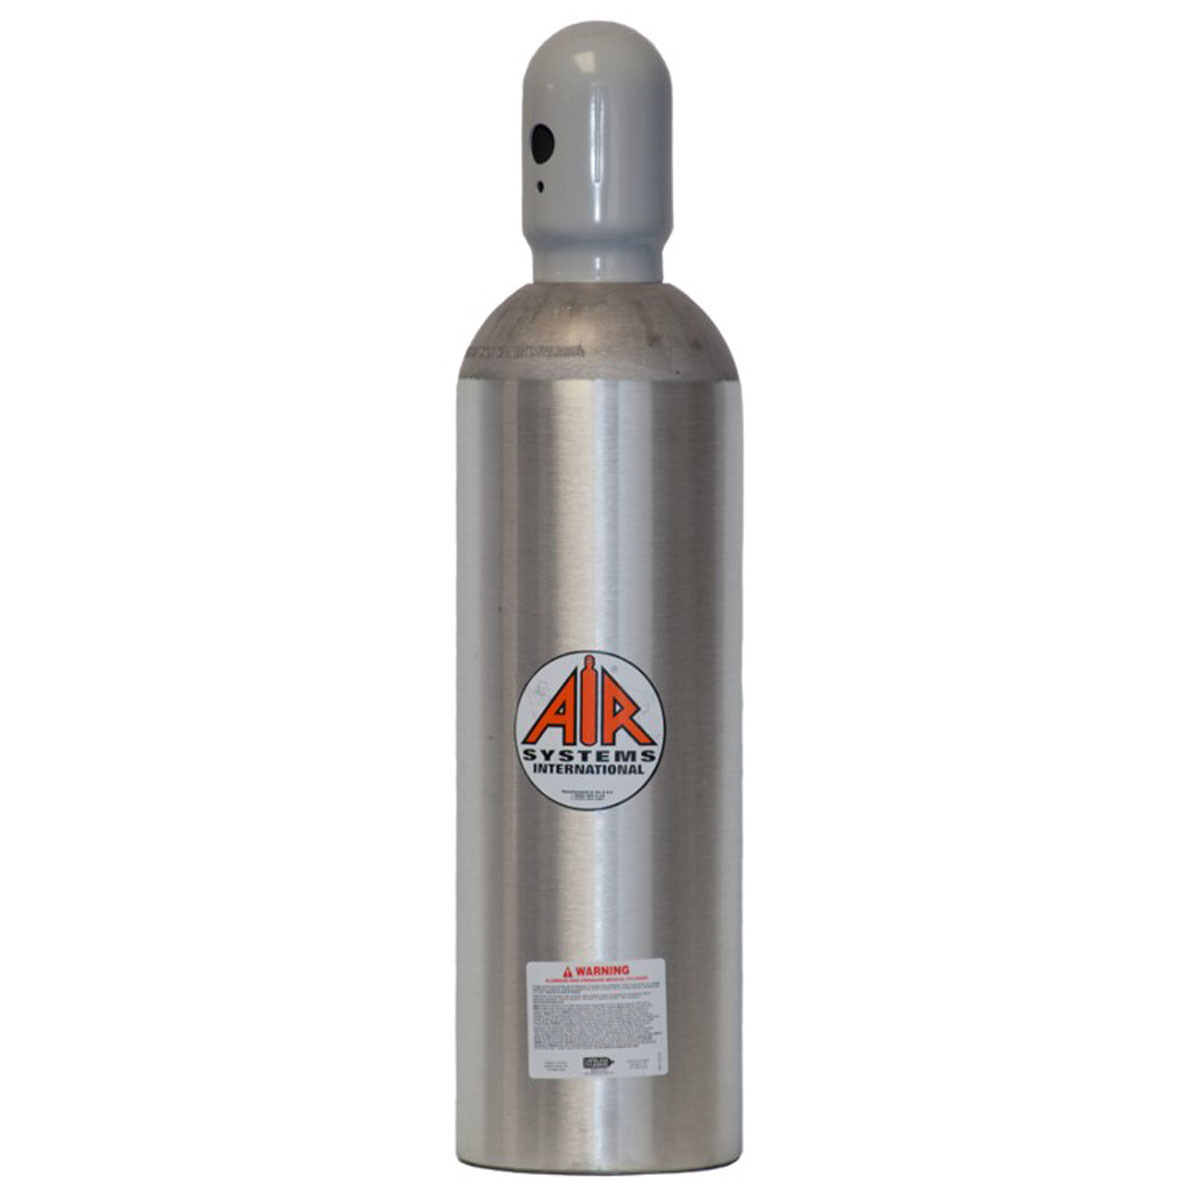 Air Systems International 60 cu ft Aluminum Air Storage Cylinder For Supplied Air Respirator (Availability restrictions apply.)